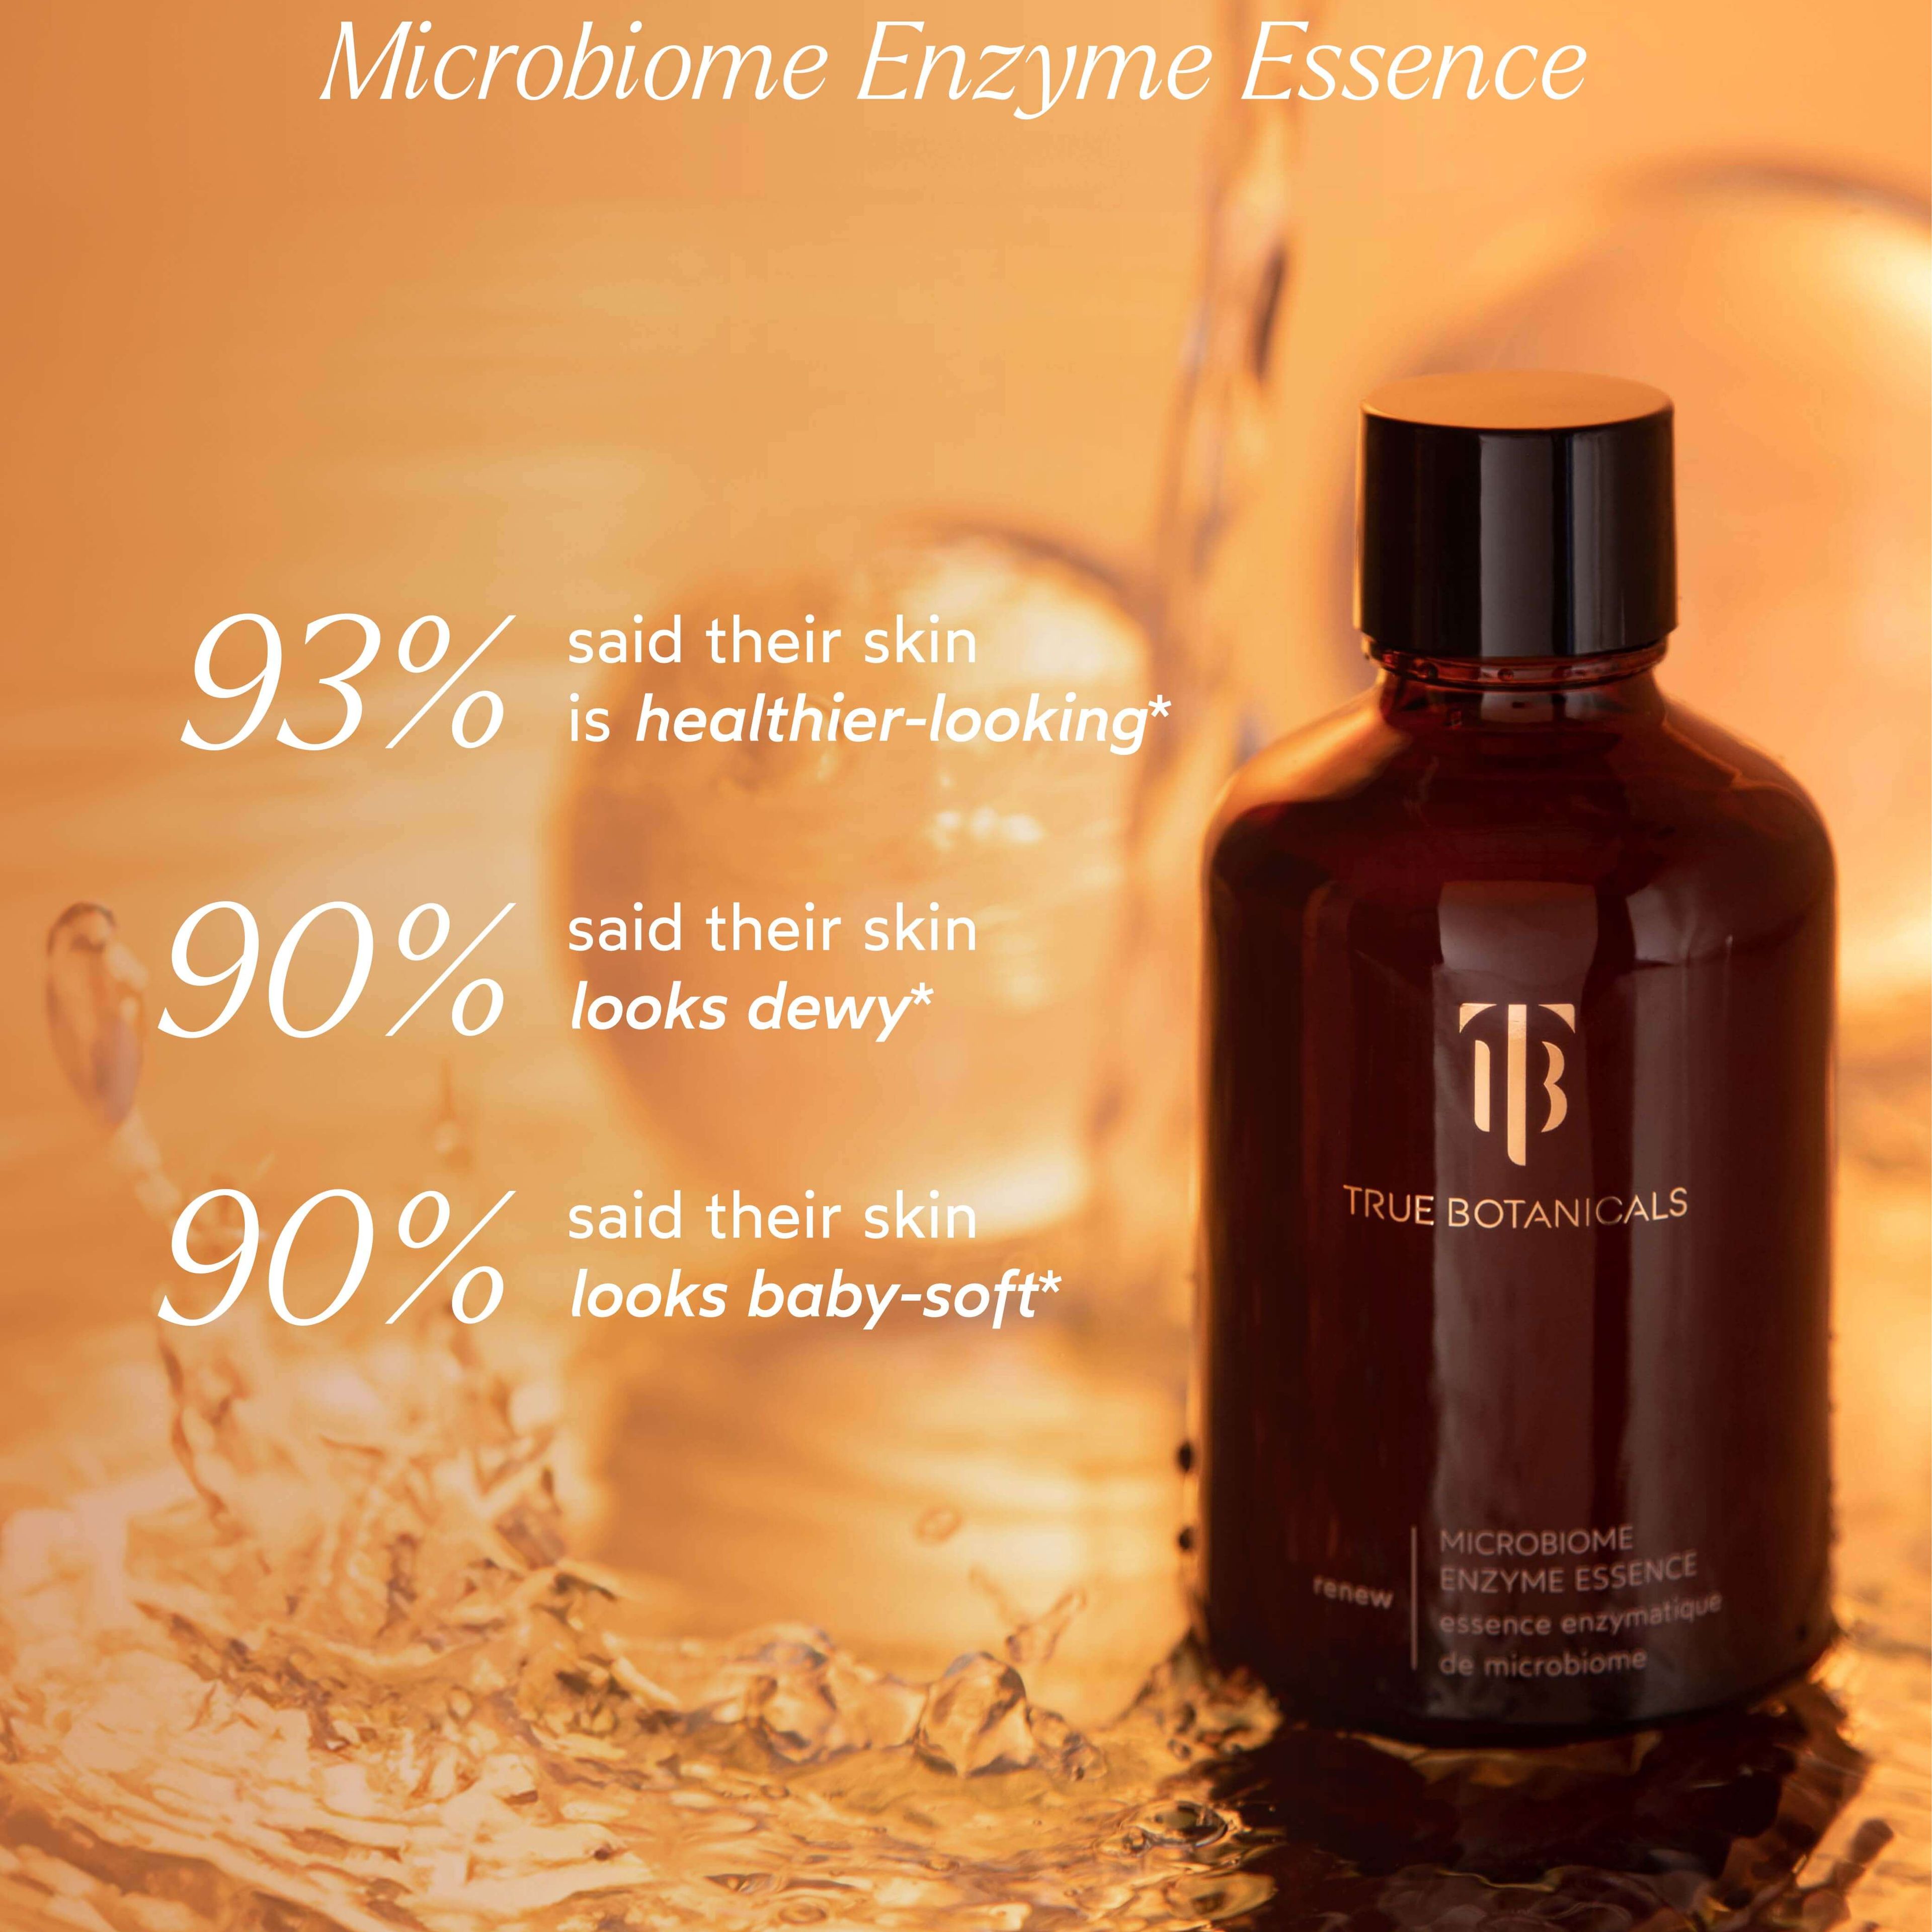 Microbiome Enzyme Essence